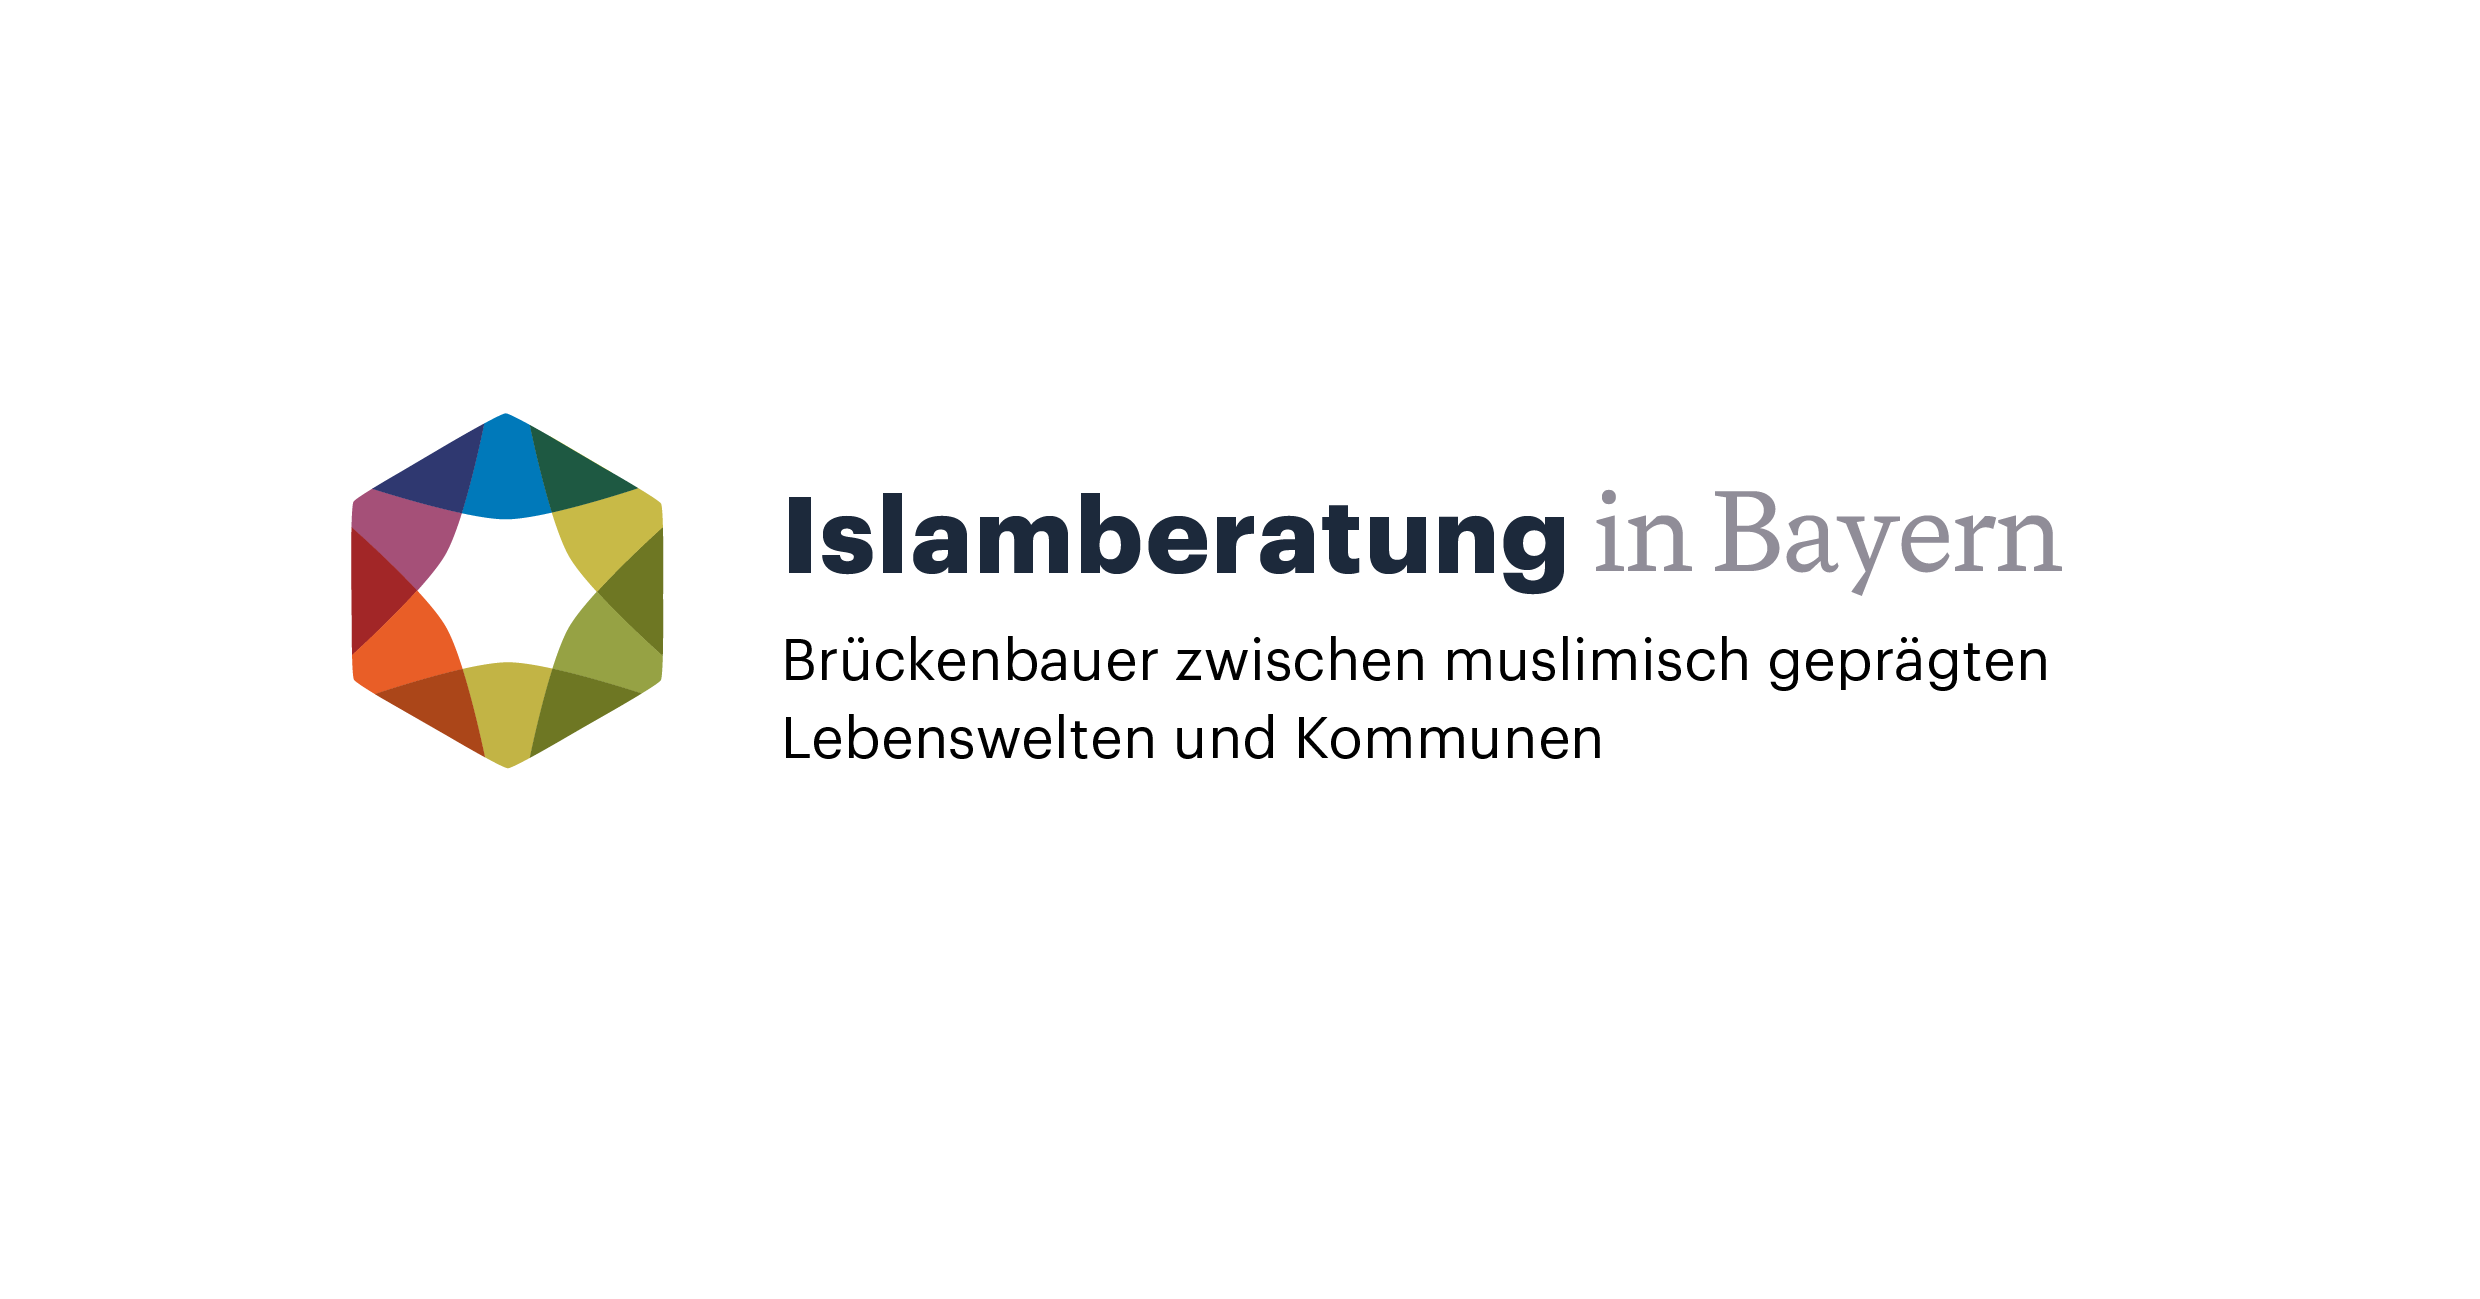 Towards entry "Islamic Affairs Consultancy in Bavaria – EZIRE supports project scientifically"